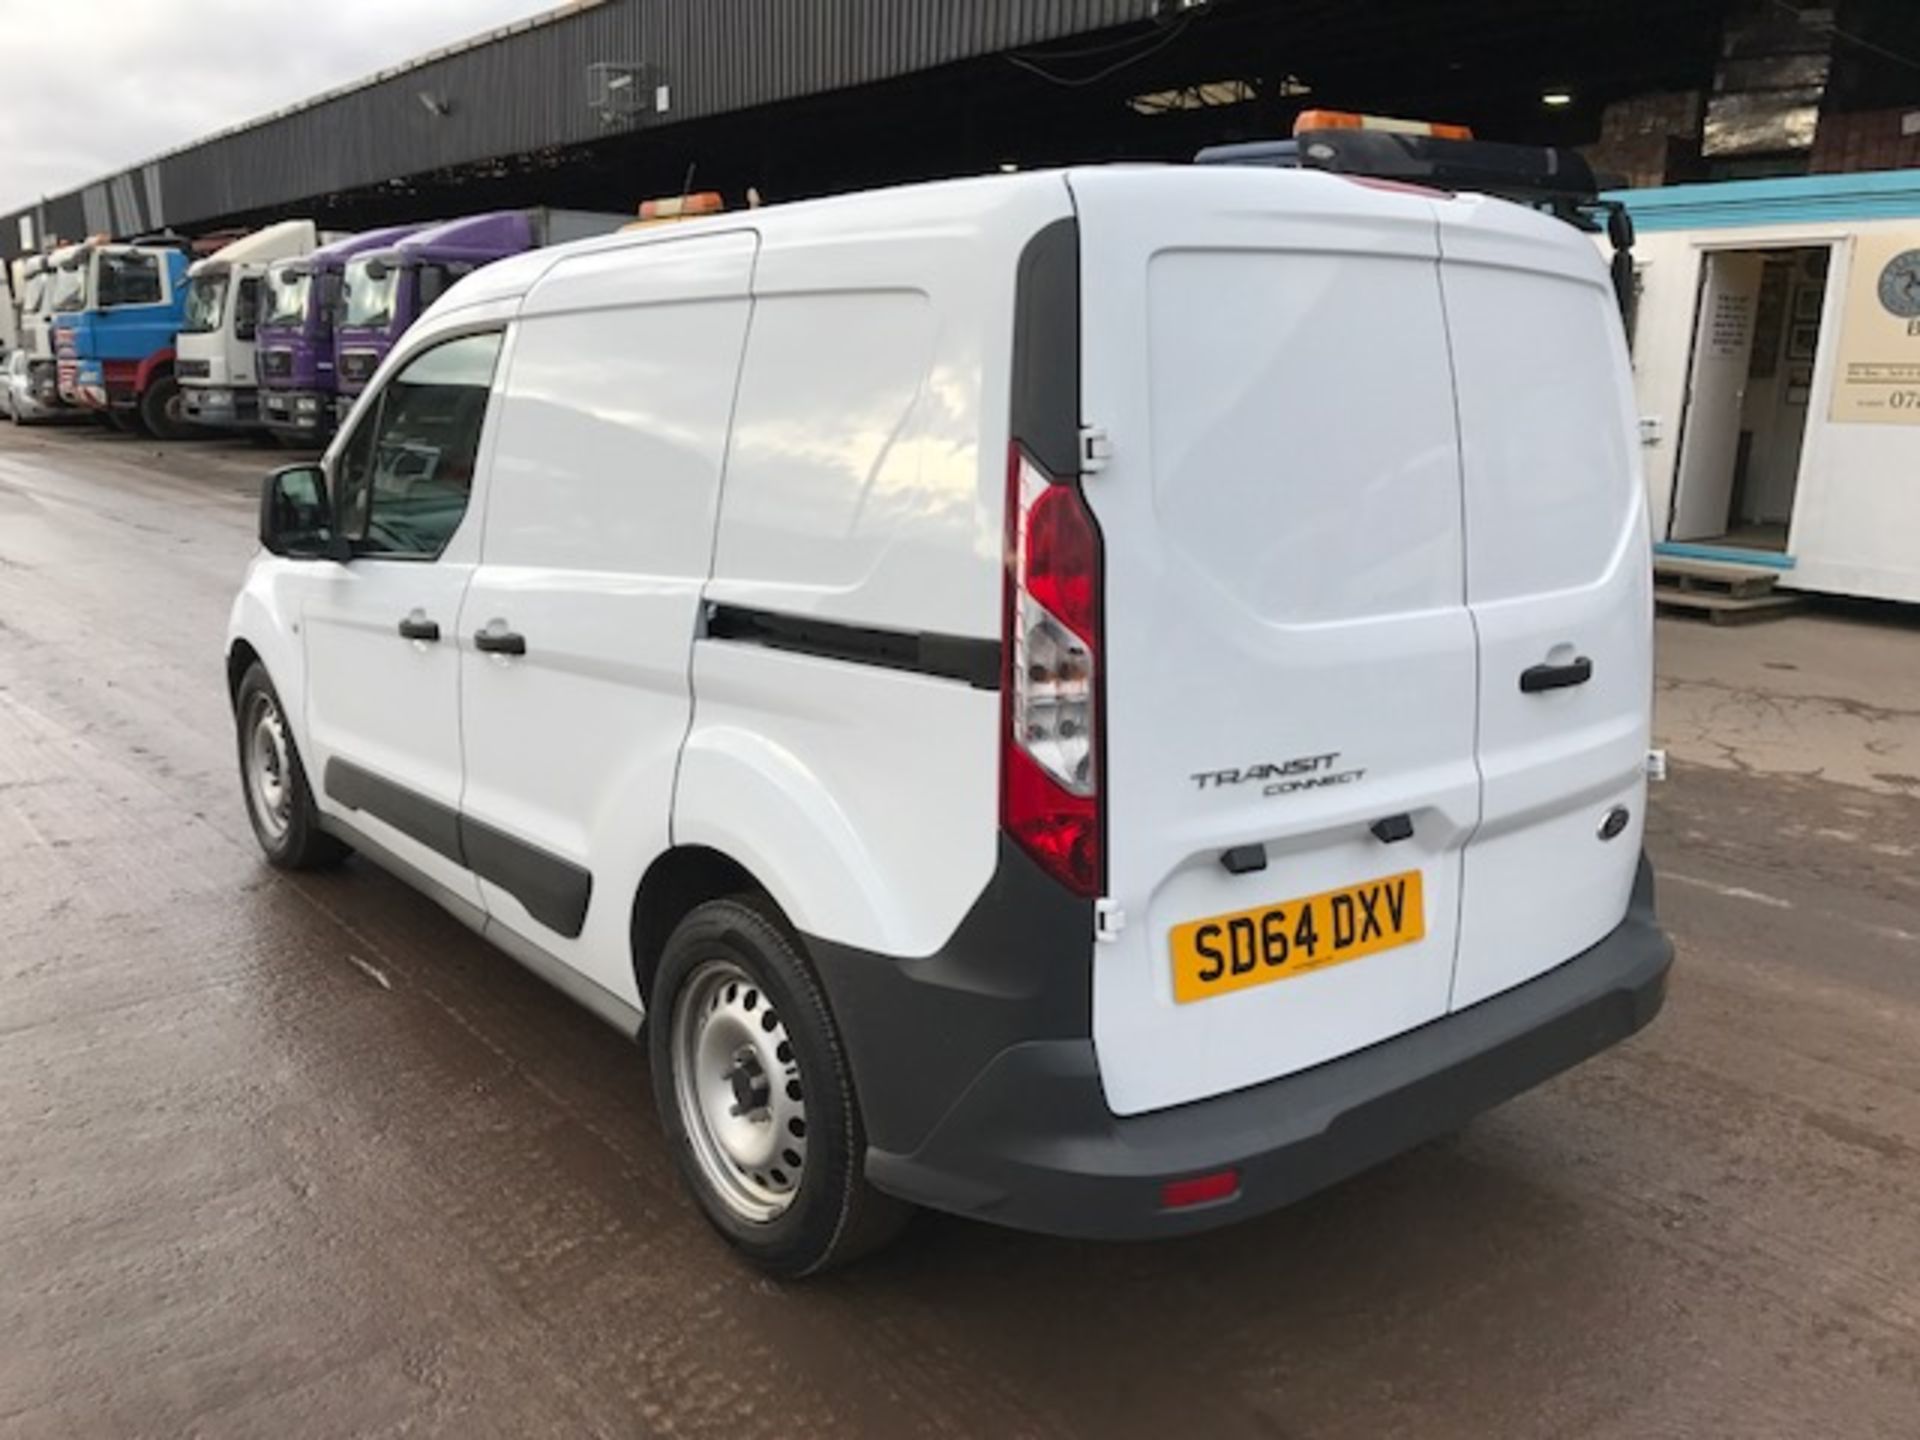 2014 Ford Transit Connect 200 van - Image 3 of 3